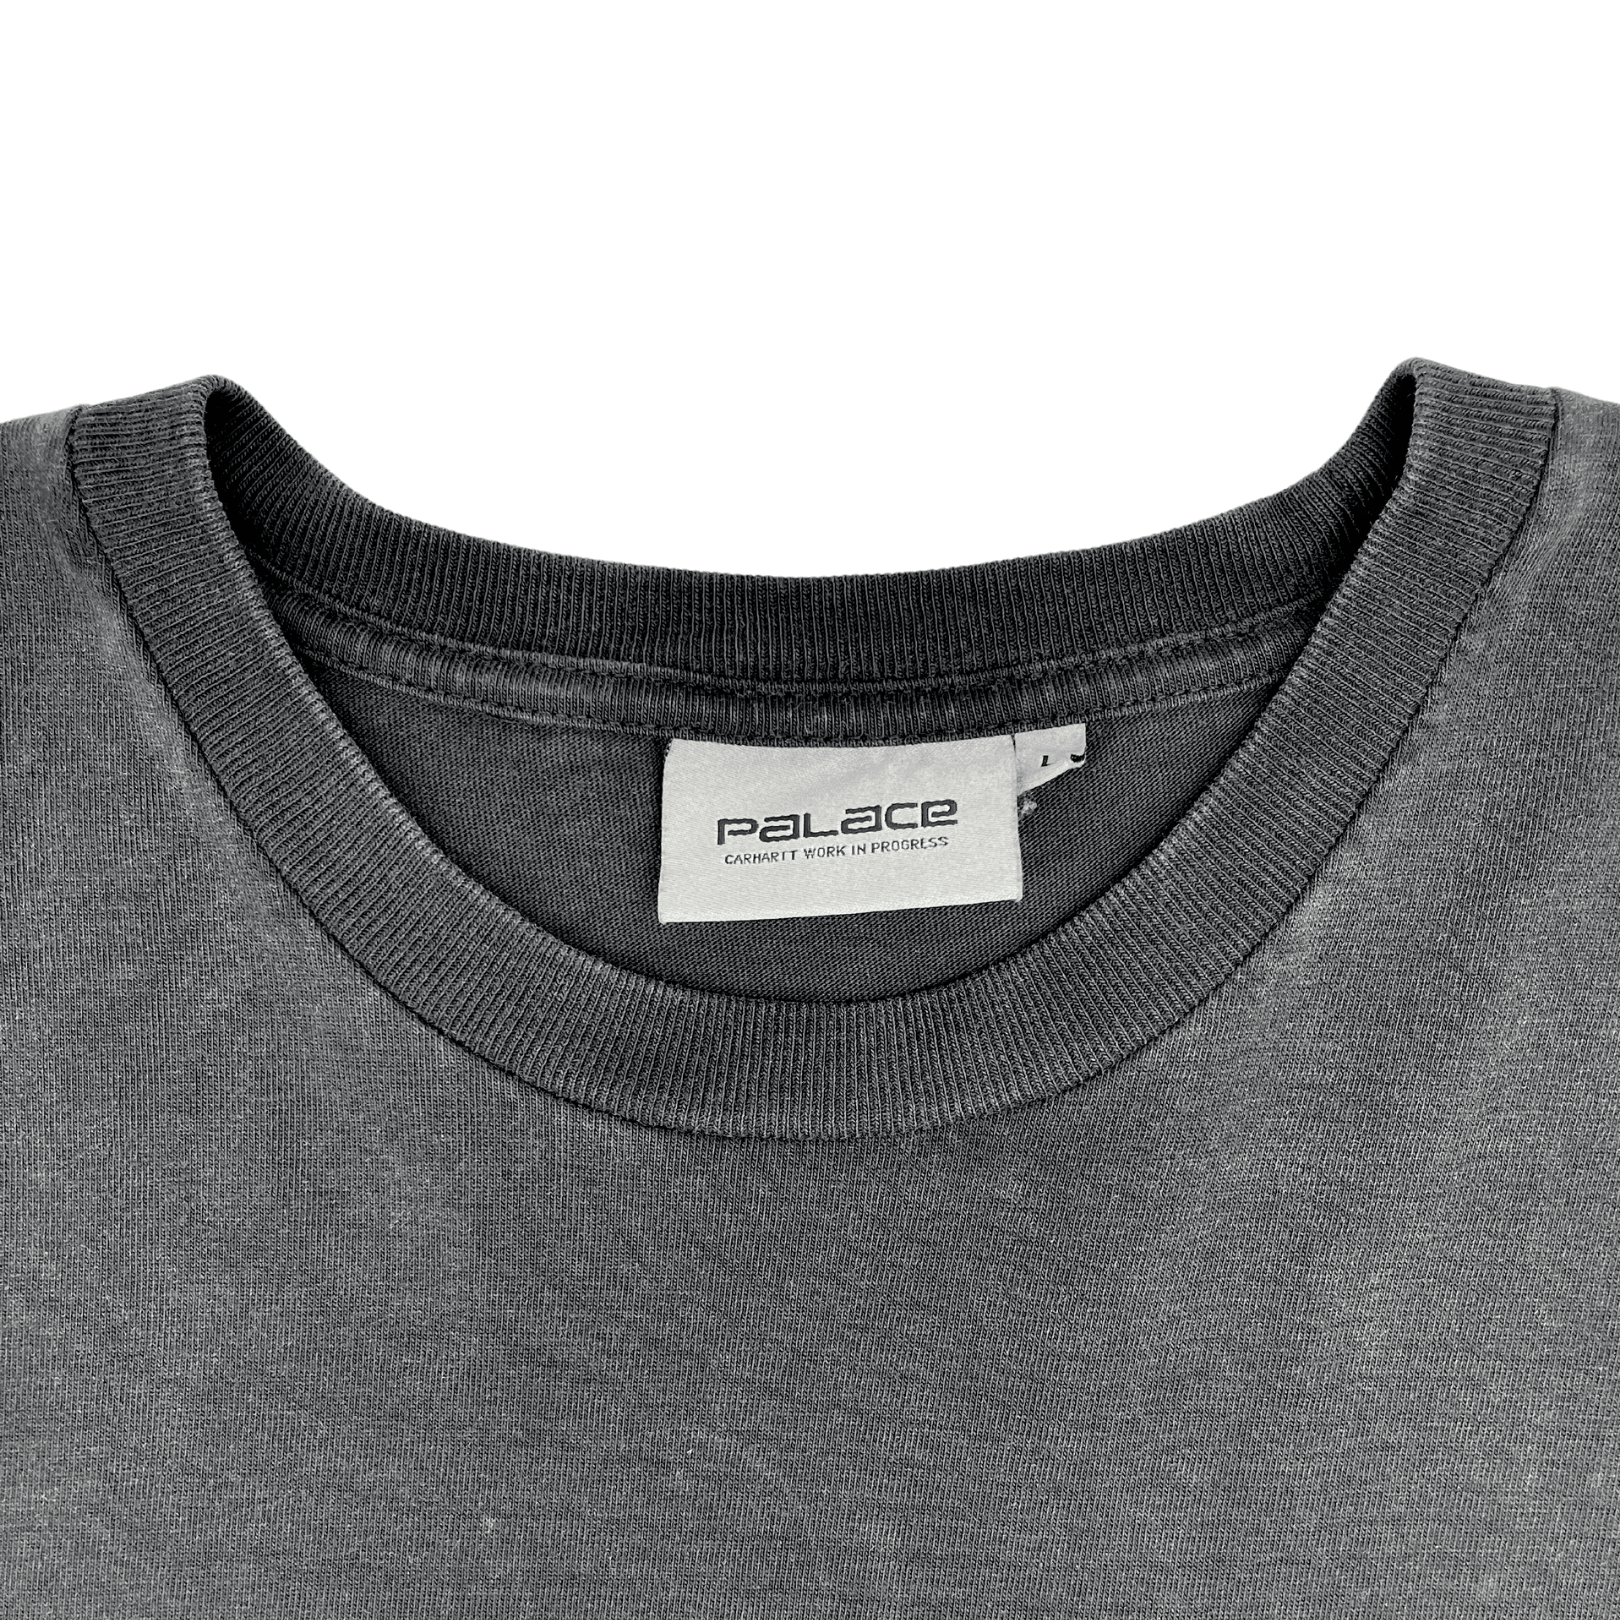 Carhartt x Palace T-Shirt - Men's L - Fashionably Yours